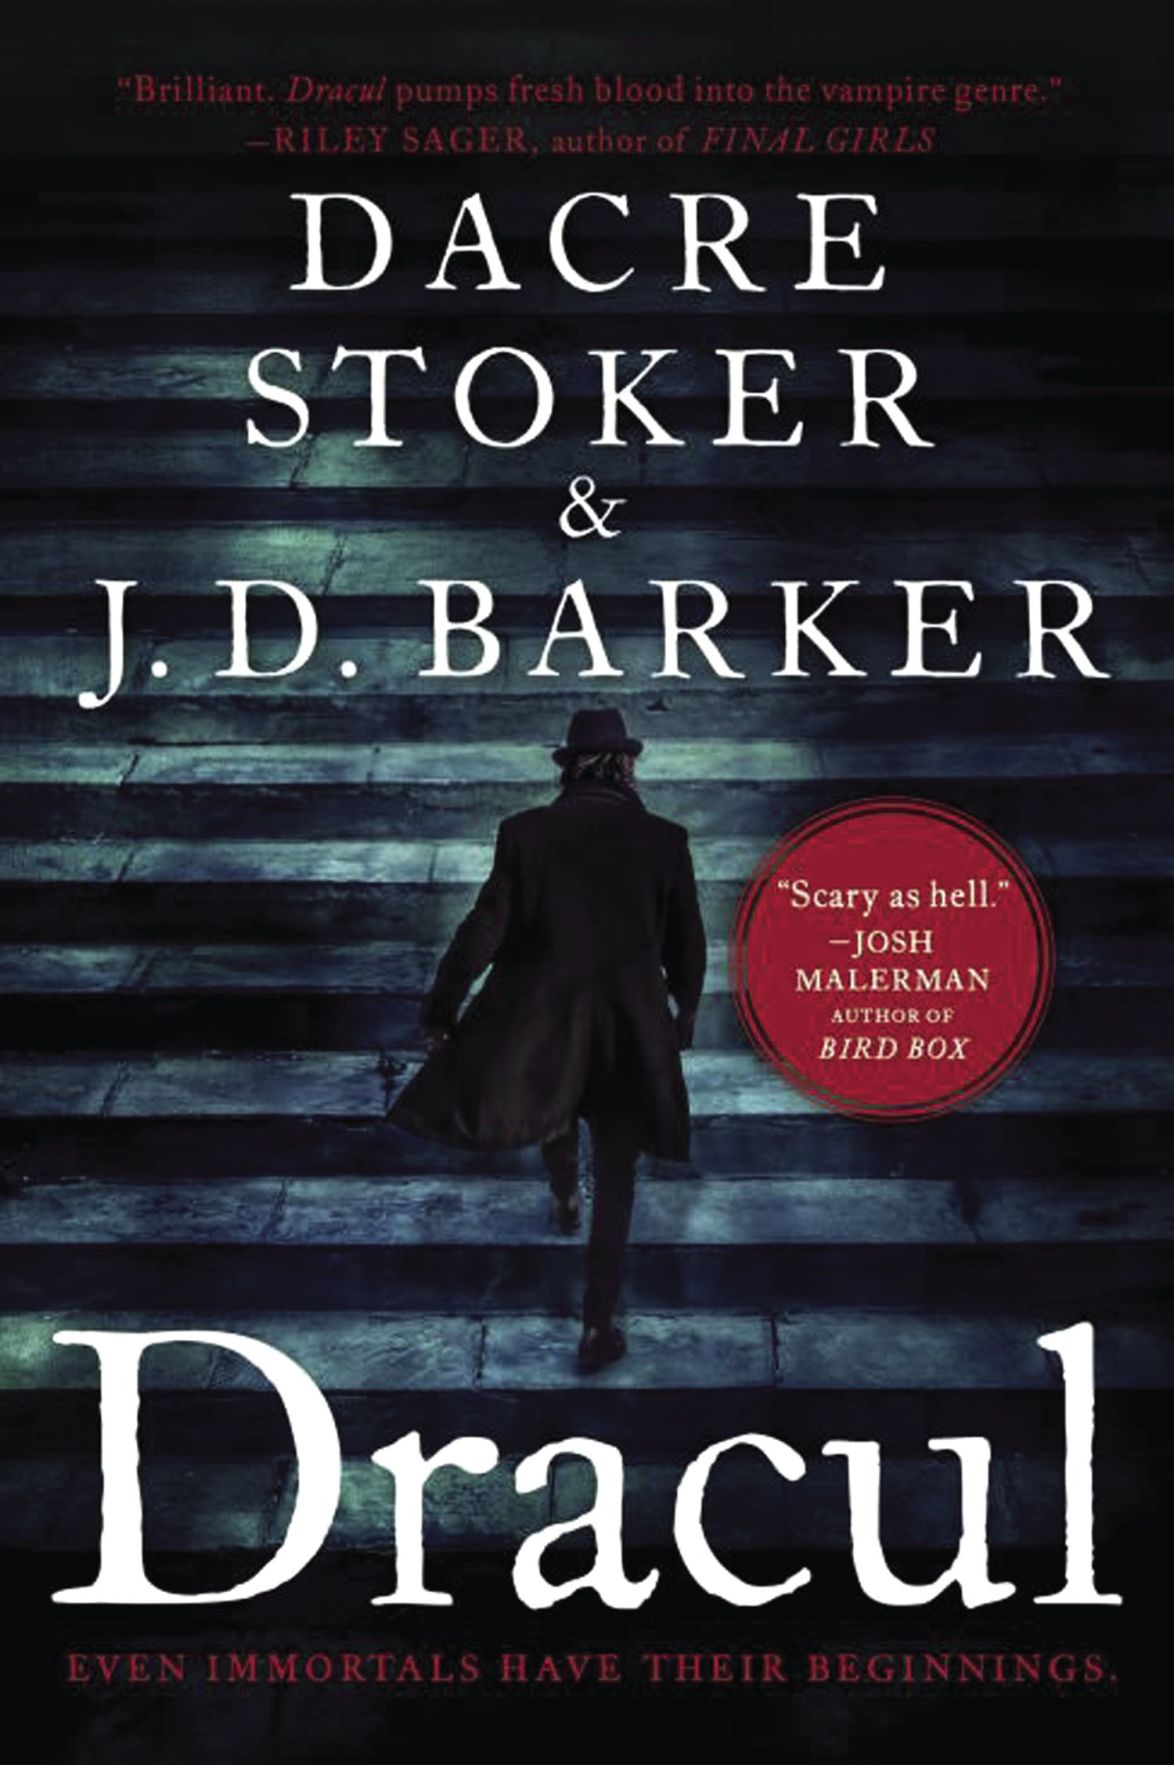 Dracula by Dacre Stoker